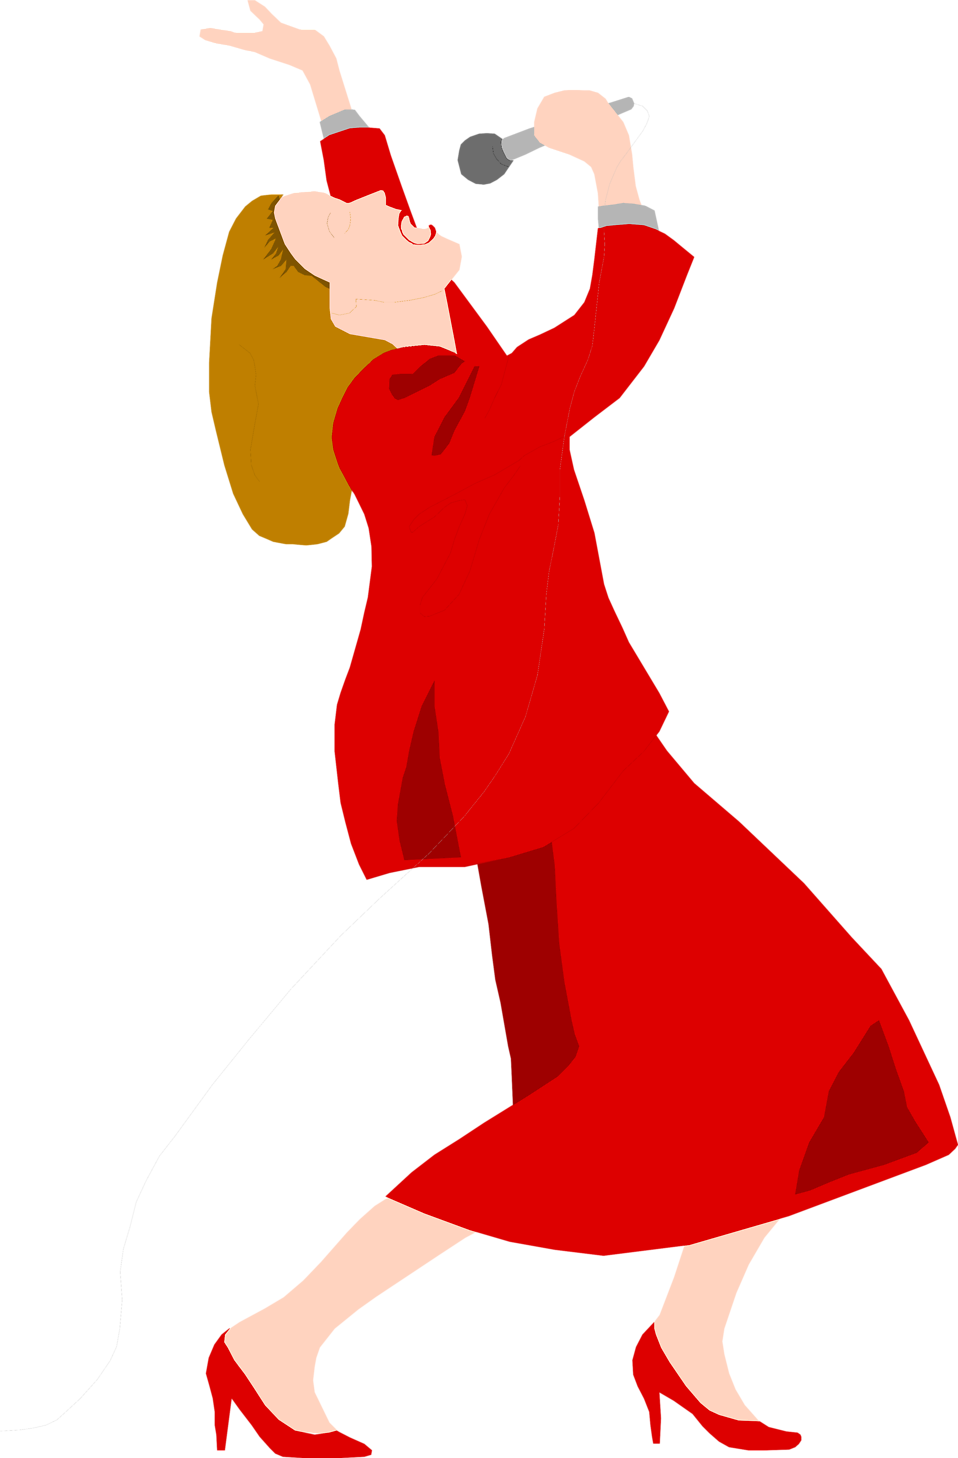 Singer   Free Stock Photo   Illustration Of A Woman In A Red Dress